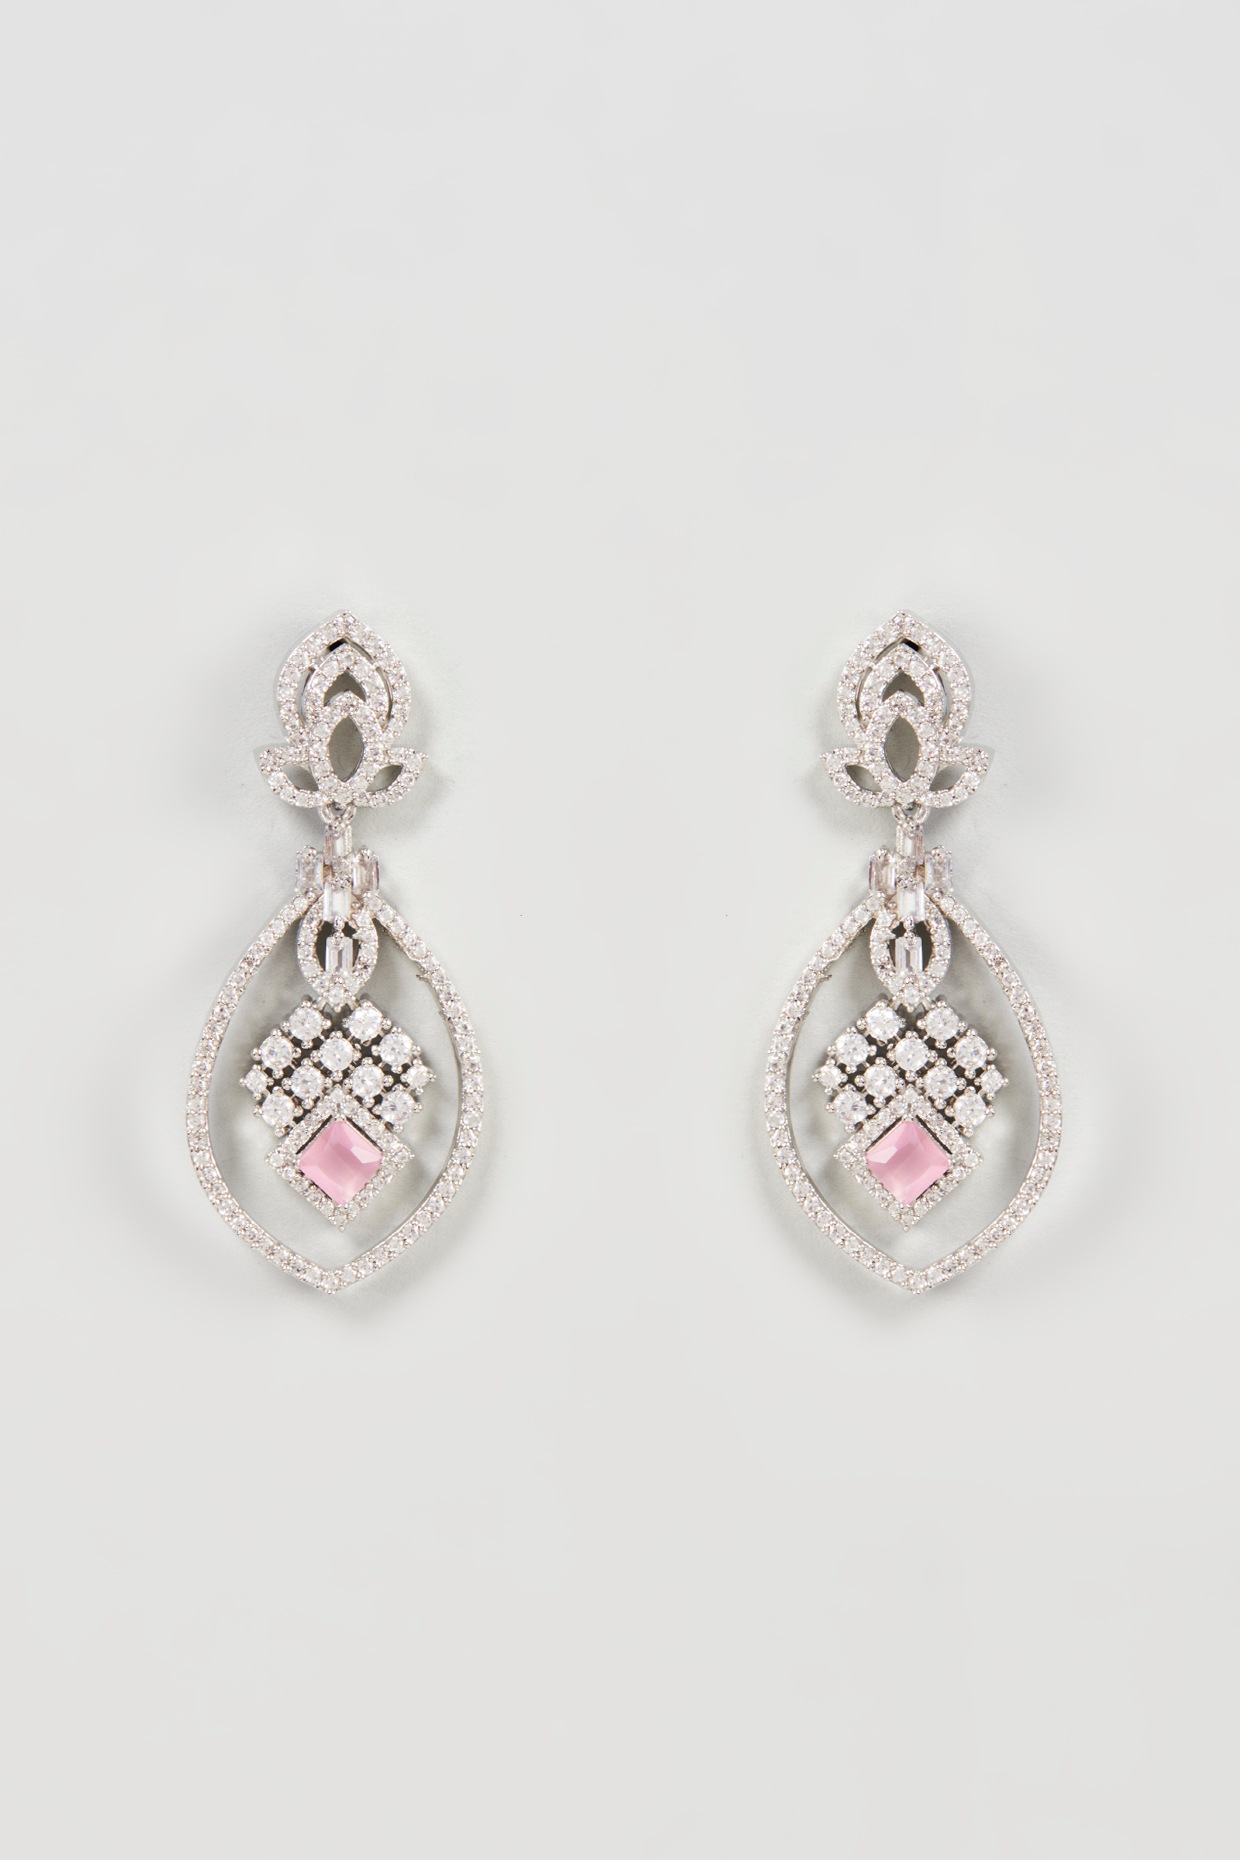 Buy Pink Diamond Studs Online In India  Etsy India